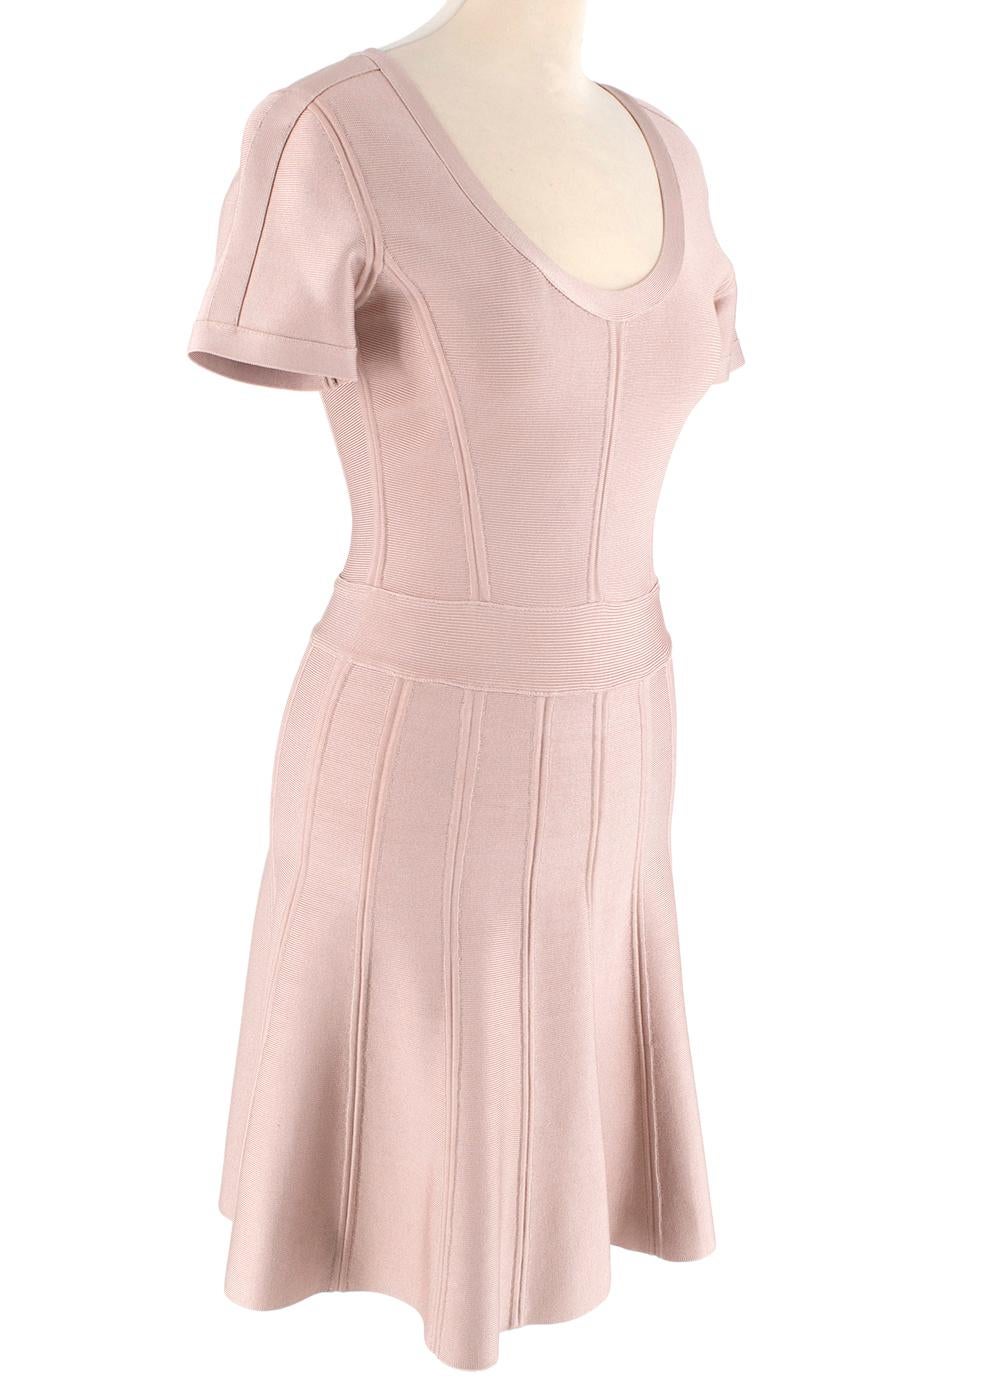 Herve Leger Blush Trish A-Line Mini Dress

-A-Line
-Skater style
-Short Sleeves
-Deep round neck 
-Hidden rear zip closure 

Material:
90% Rayon 
9% Nylon 
1% Spandex

Made In China 

Dry clean only 

PLEASE NOTE, THESE ITEMS ARE PRE-OWNED AND MAY